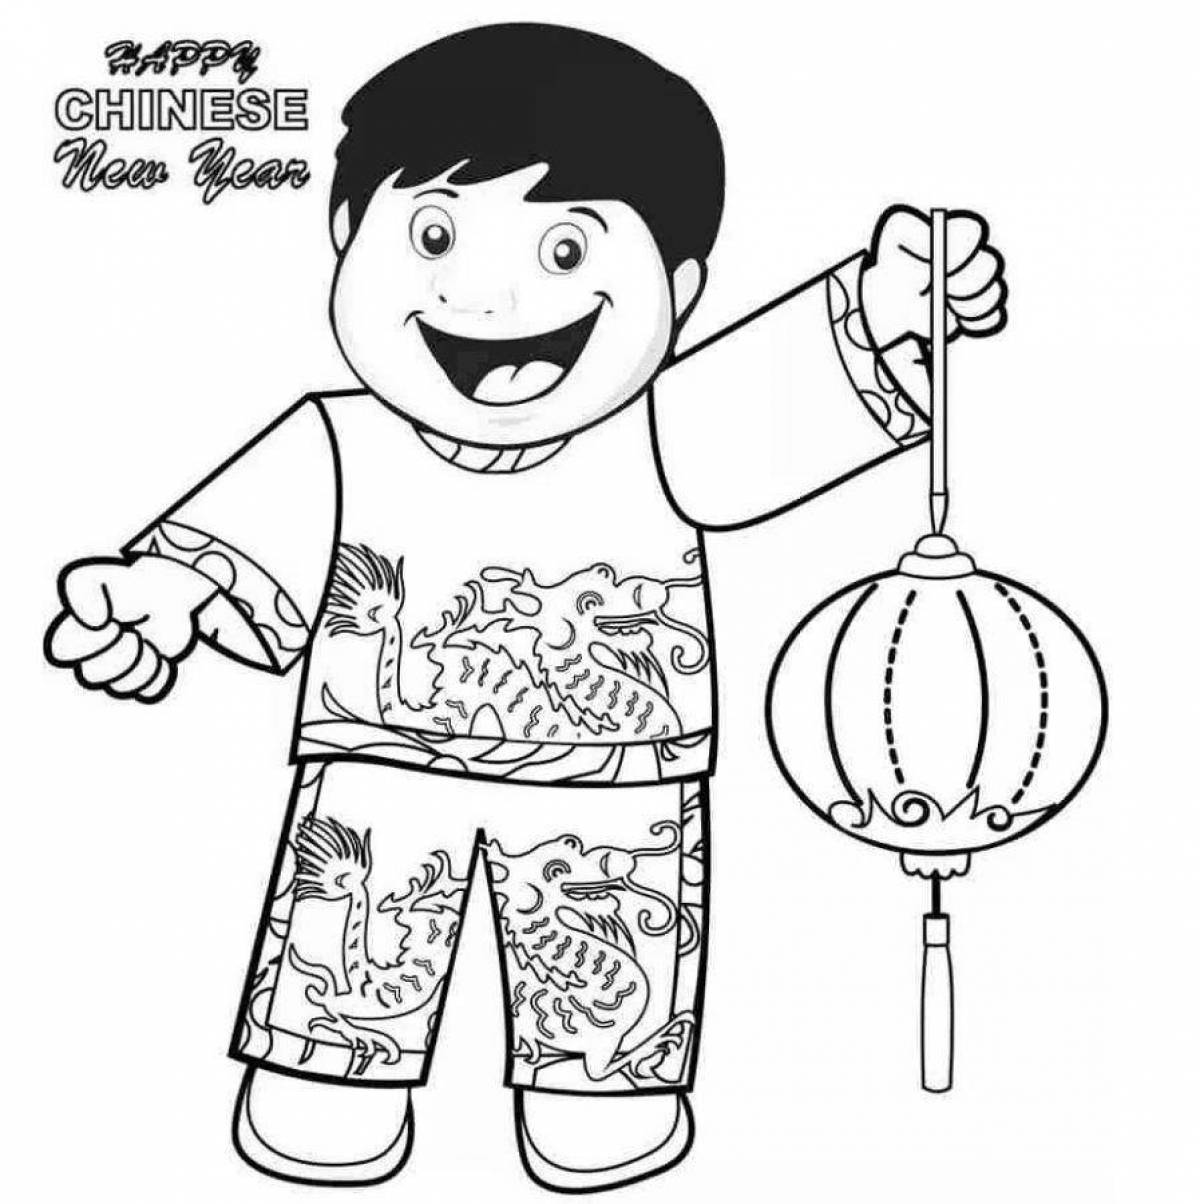 Colorful Chinese New Year coloring book